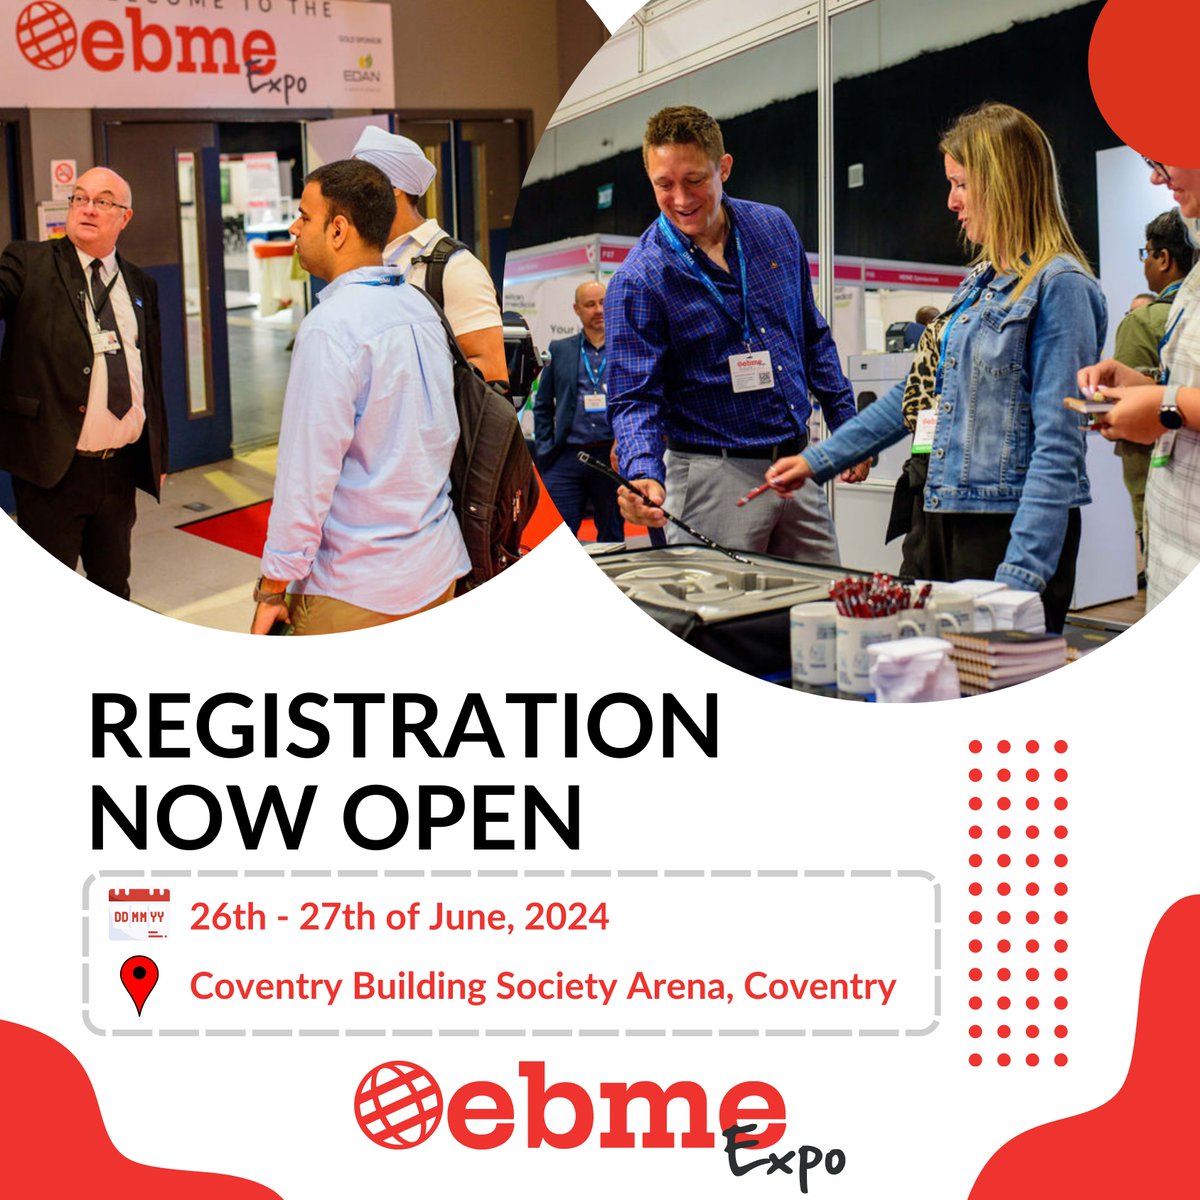 '📢 Exciting News! Registration for EBME Expo 2024 is Now Open! 🎉 Secure your spot at the UK's largest gathering of clinical engineers, healthcare managers, and industry experts. 

Register today: ebme-expo.com/pre-registrati…

#EBMEExpo #RegistrationOpen